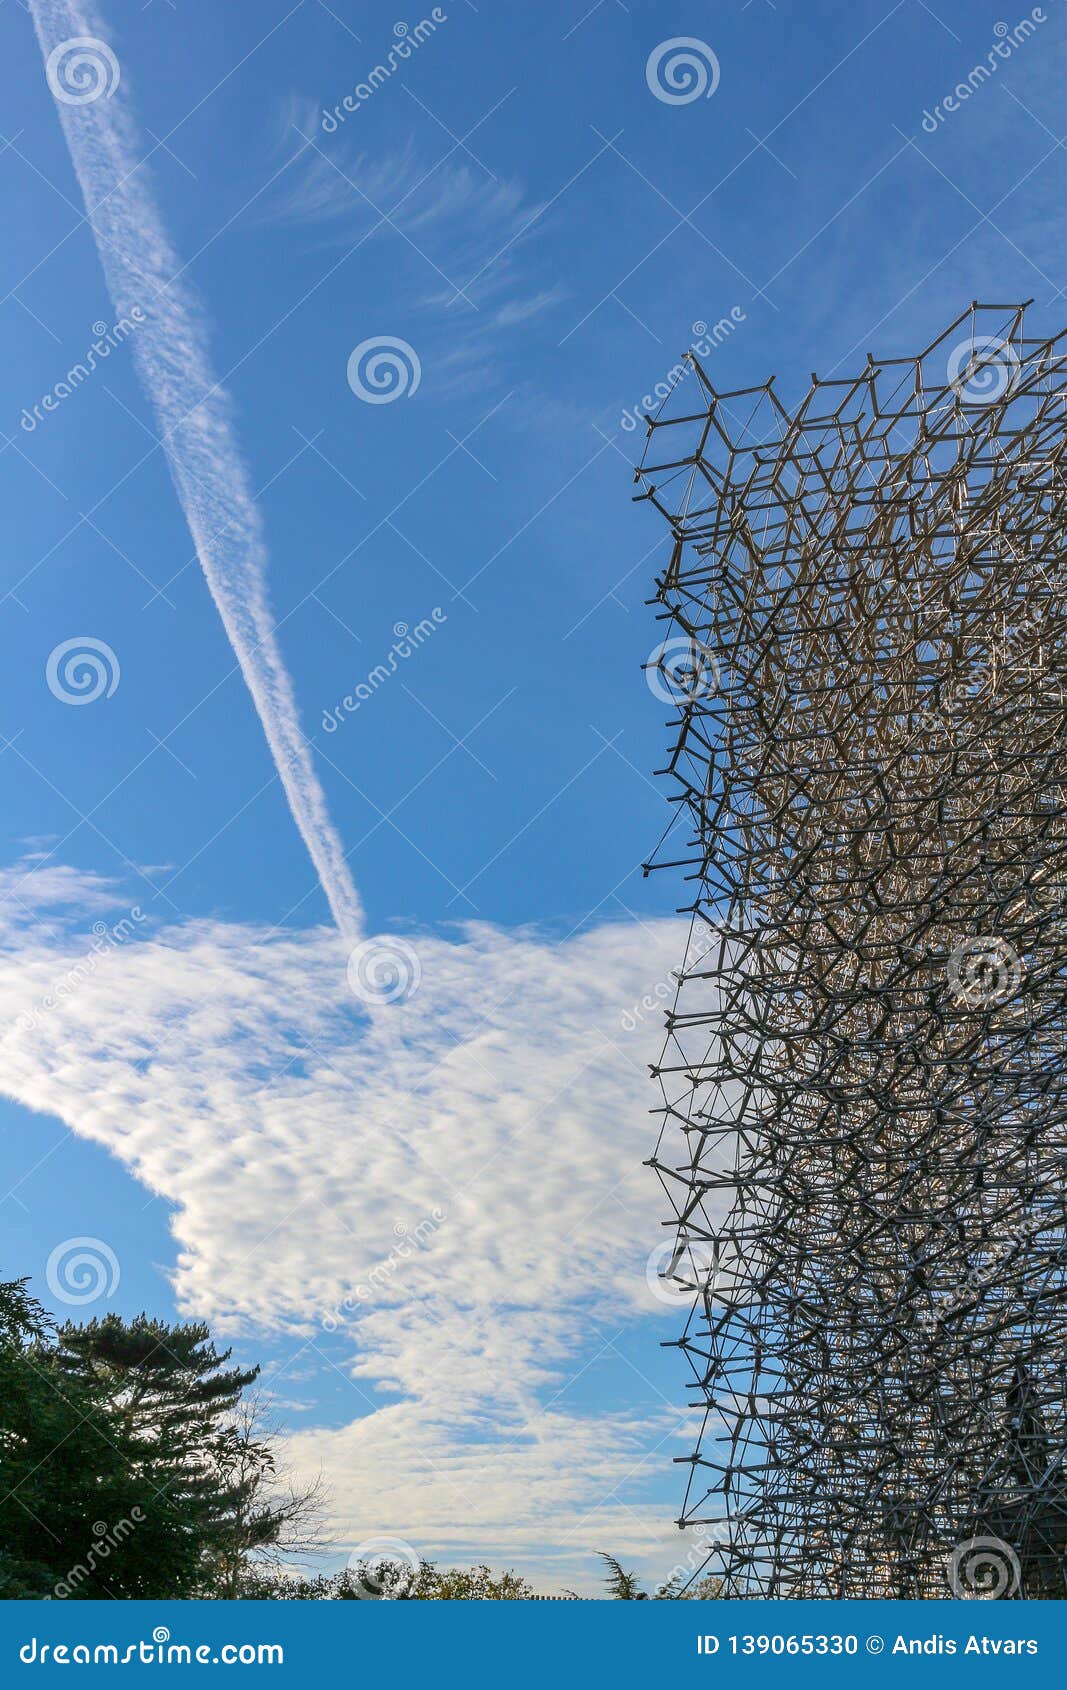 The Vast Blue Sky And Clouds Next To Steel Net Fence Freedom Concept ...
